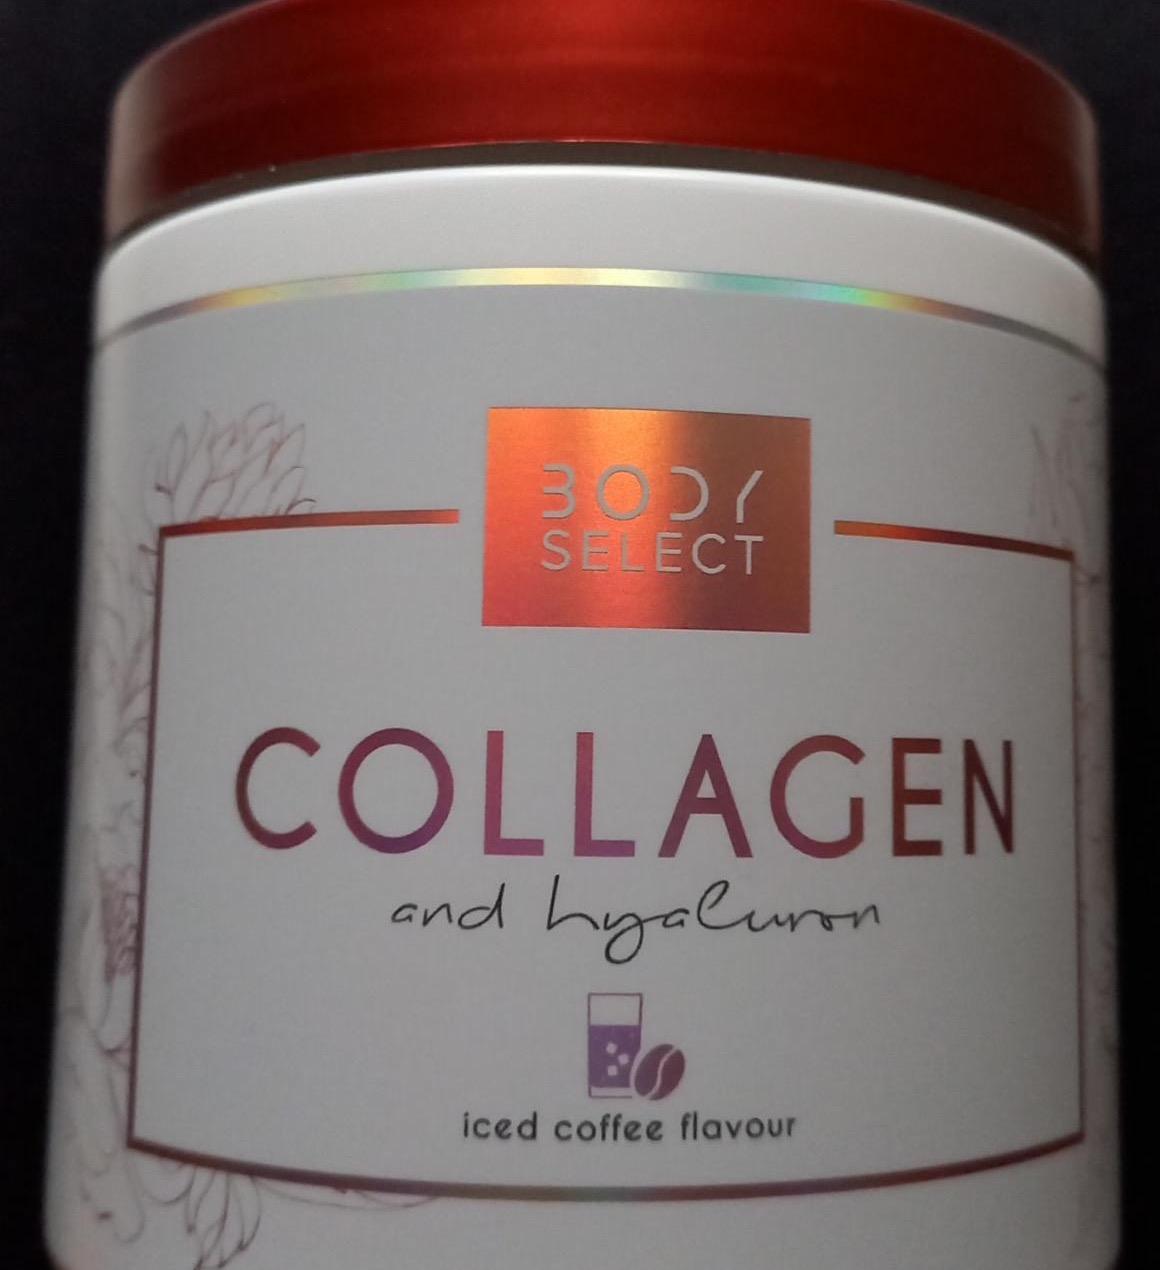 Fotografie - Collagen and hyaluron iced coffee flavour Body Select